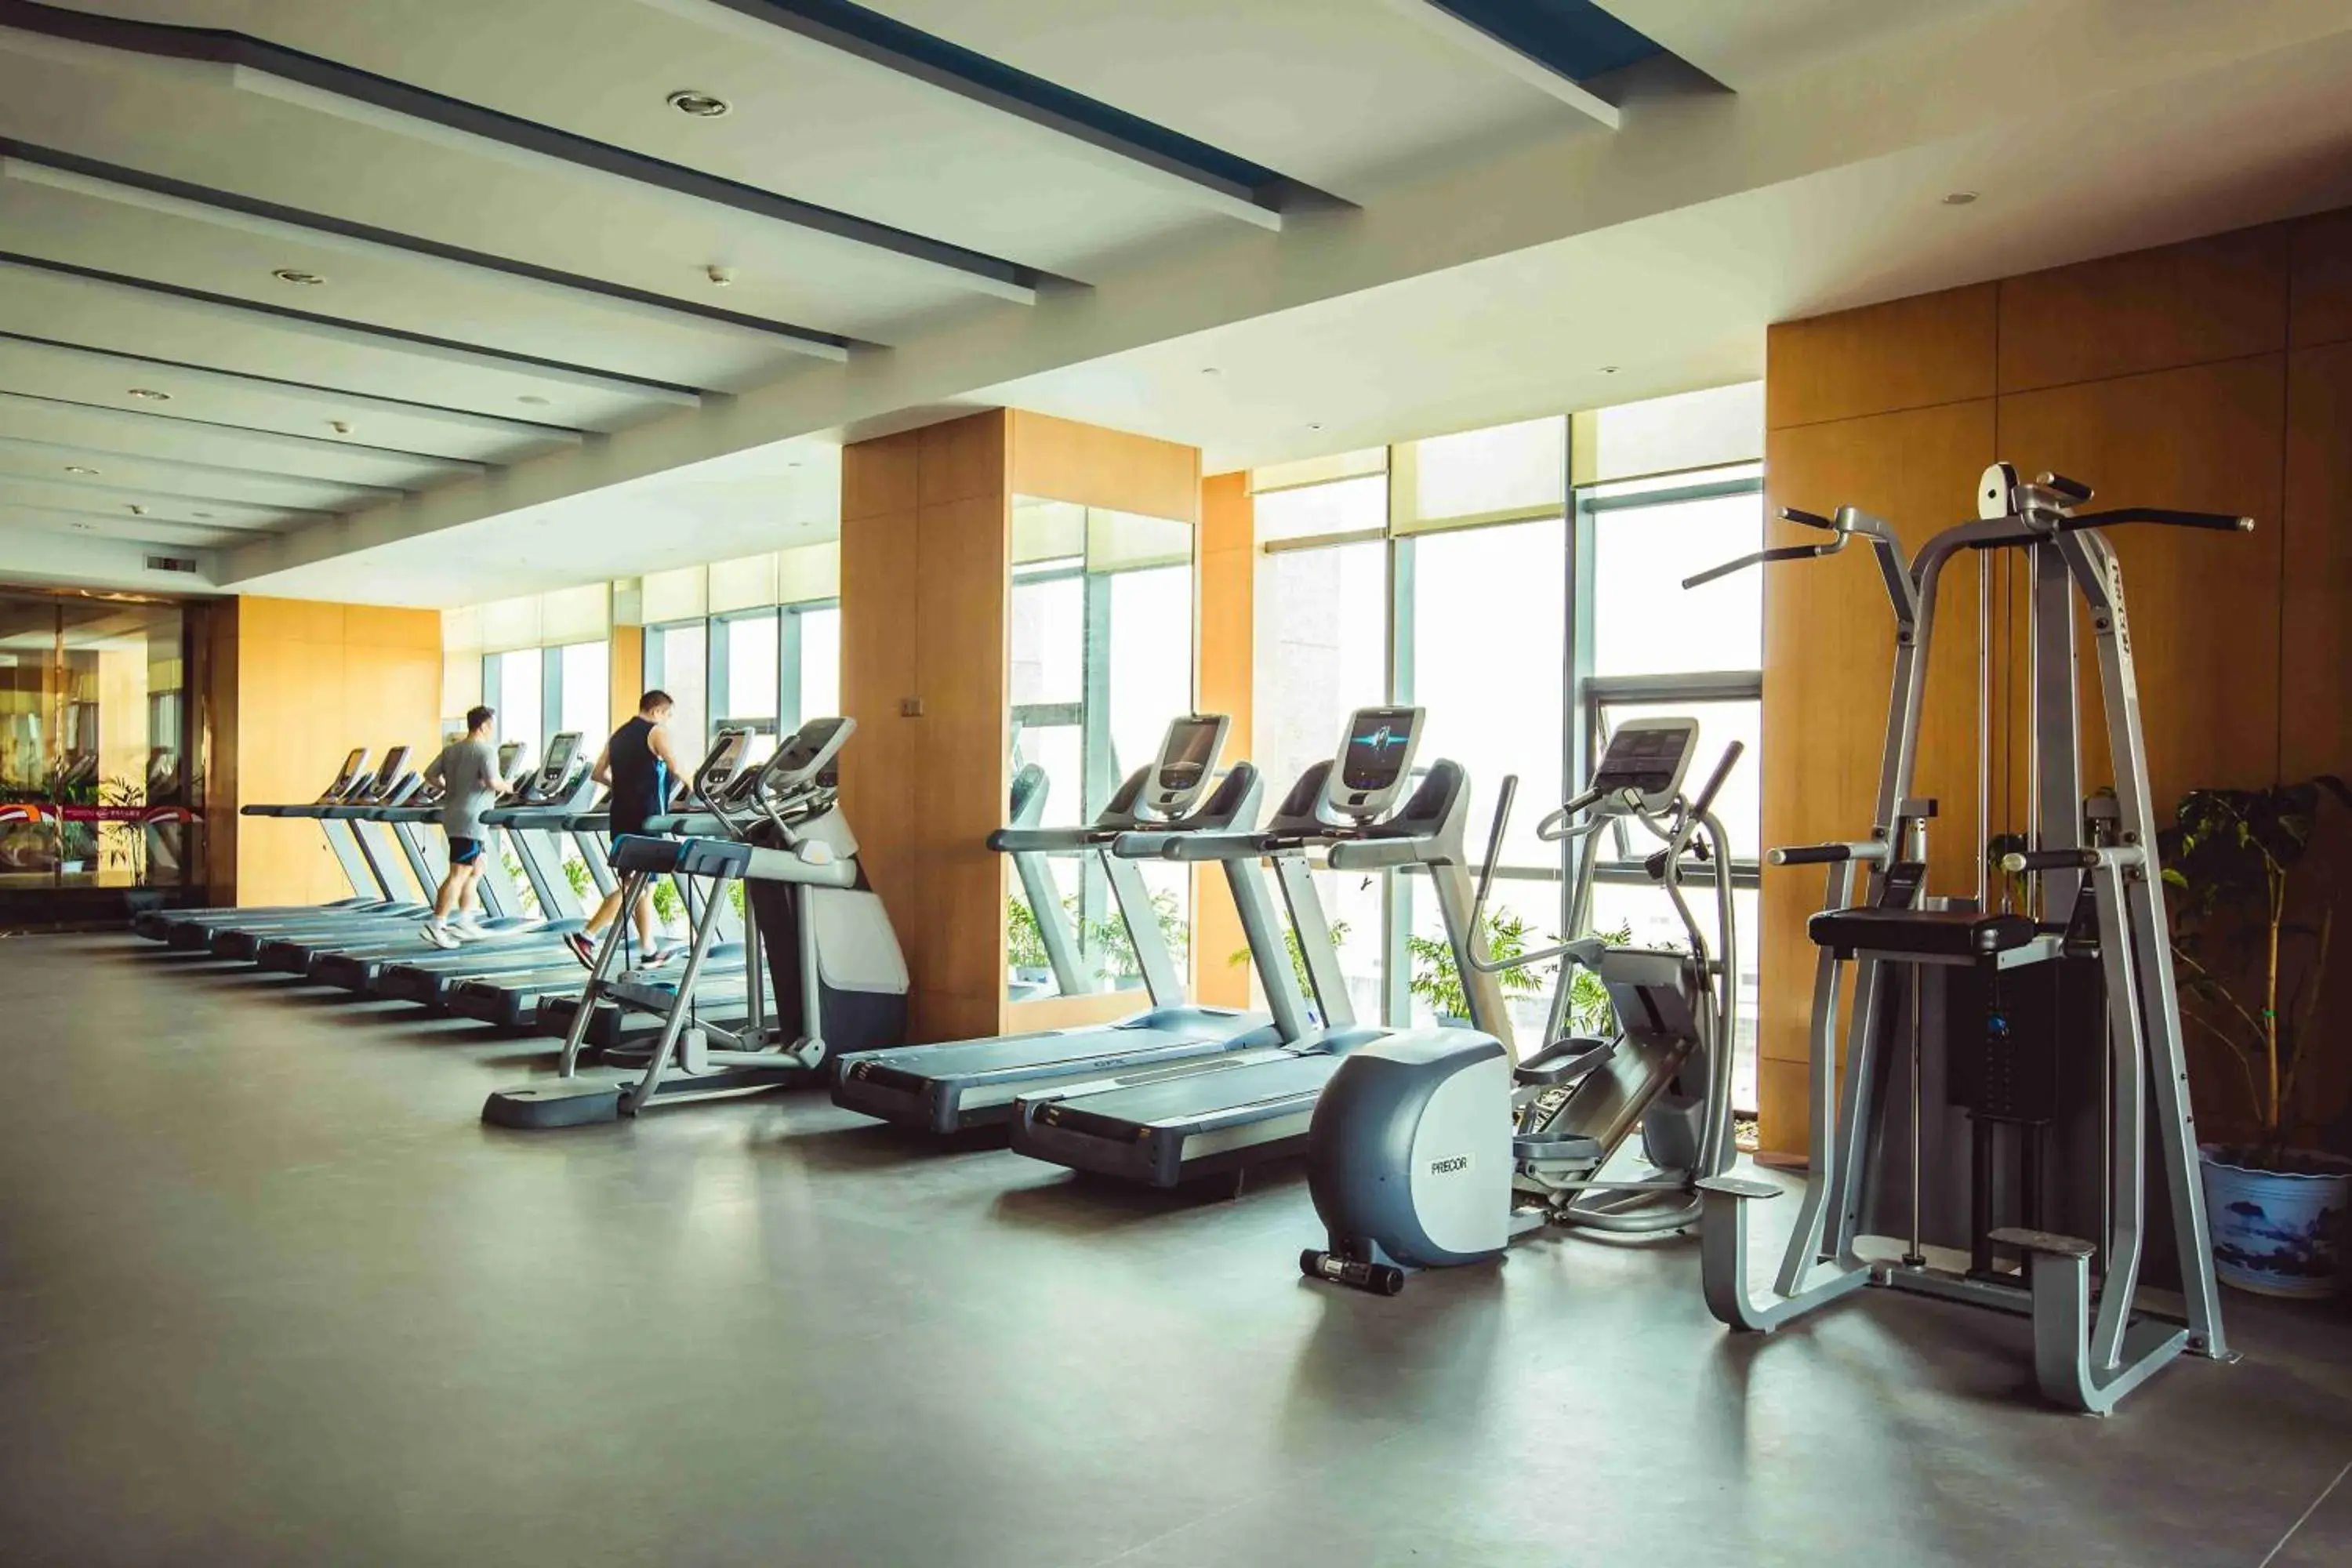 Fitness centre/facilities, Fitness Center/Facilities in WorldHotel Grand Jiaxing Hunan